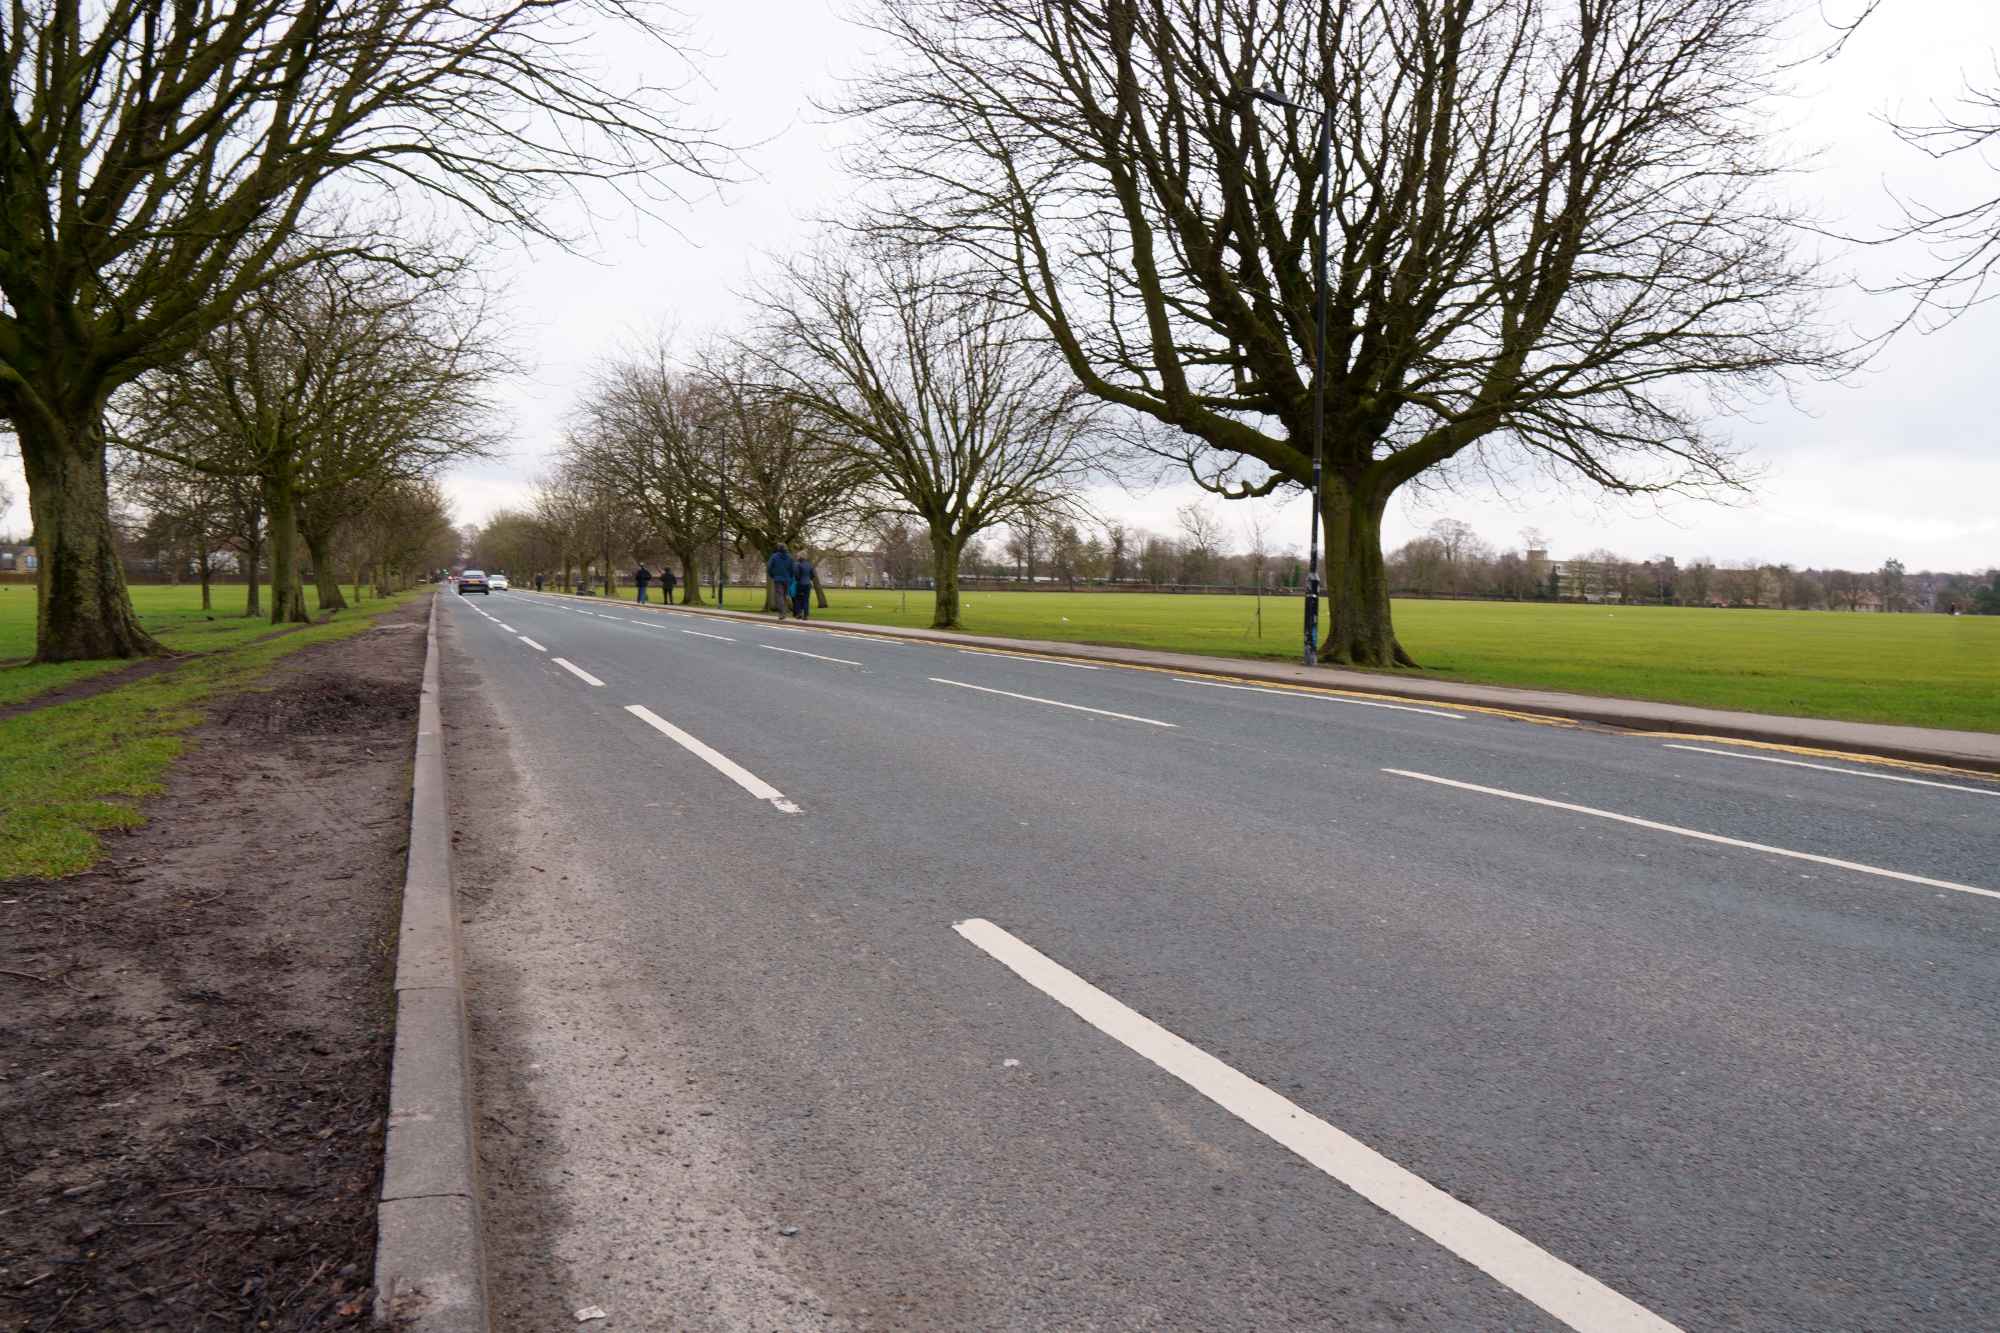 Oatlands Drive will become a one-way road